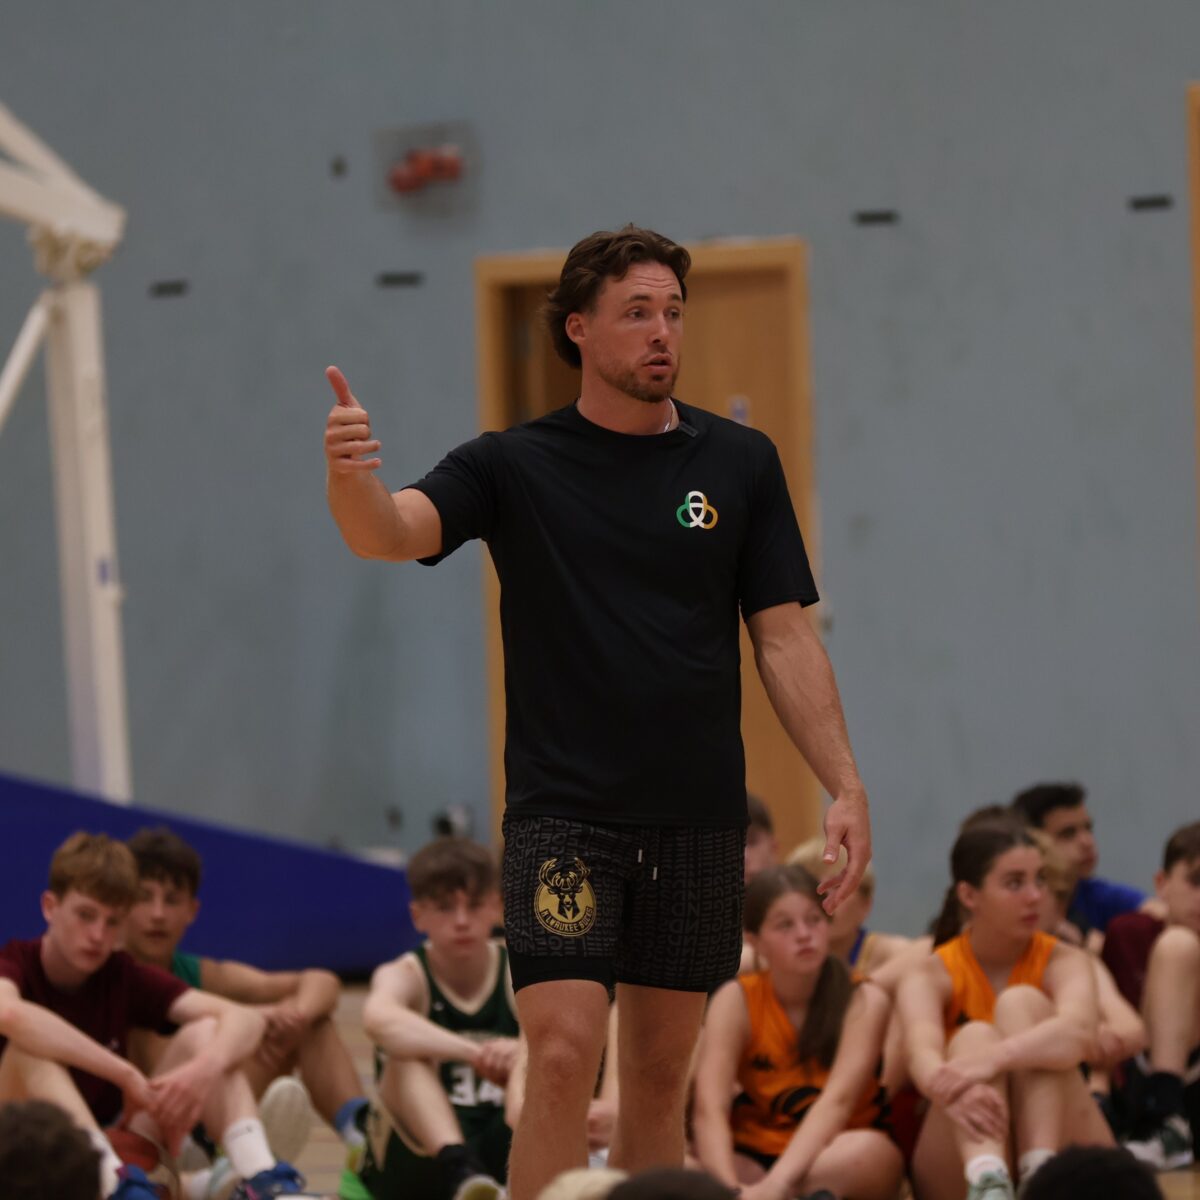 Pat Connaughton teaching young Irish basketball players at his coaching clinic in Galway